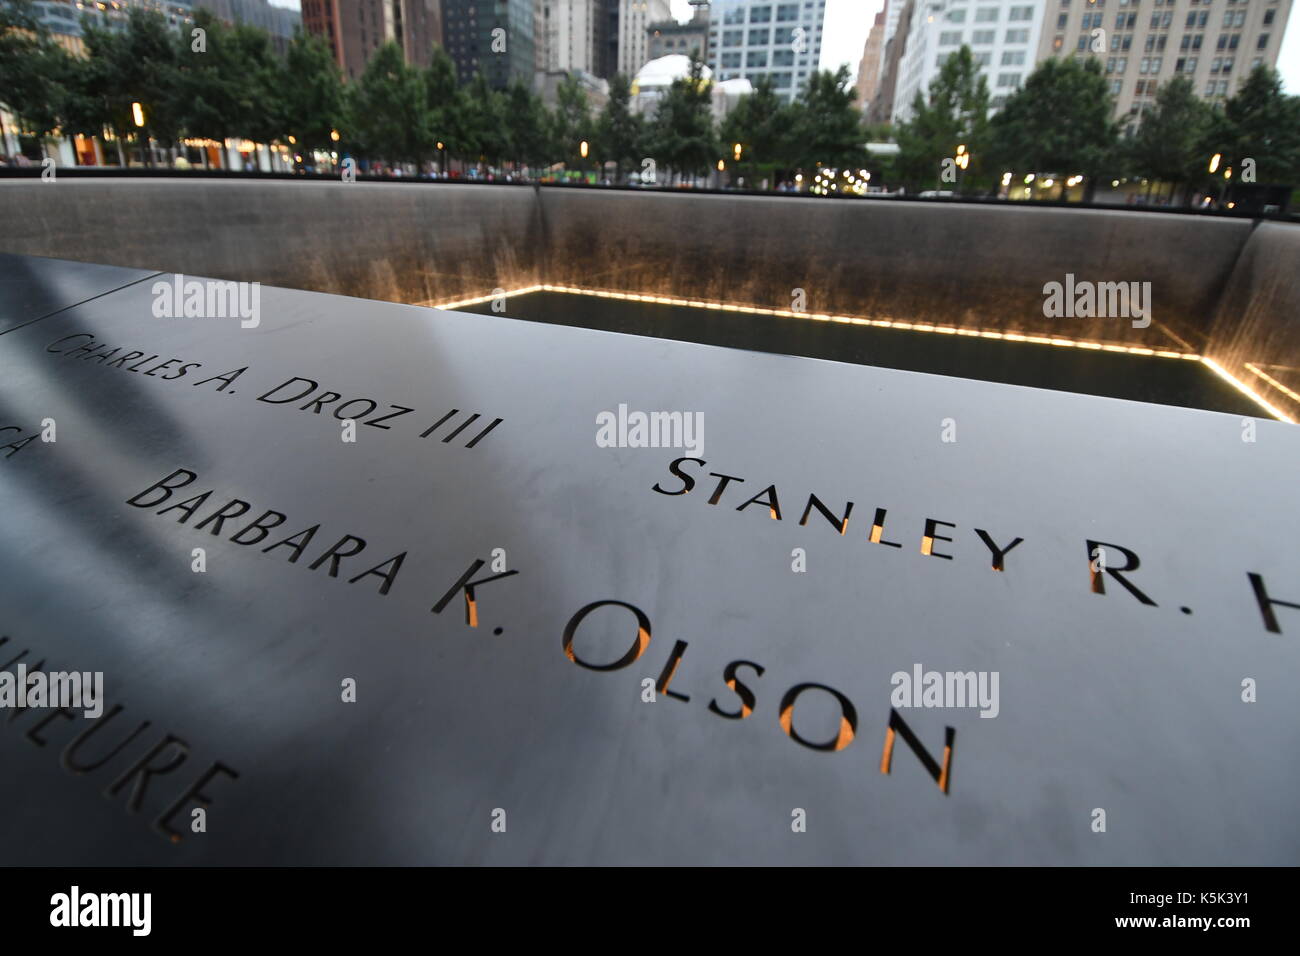 The 9/11 Memorial in New York City. Barbara K. Olson was an attorney, commentator, and wife of U.S. Solicitor General Theodore Olson. Stock Photo